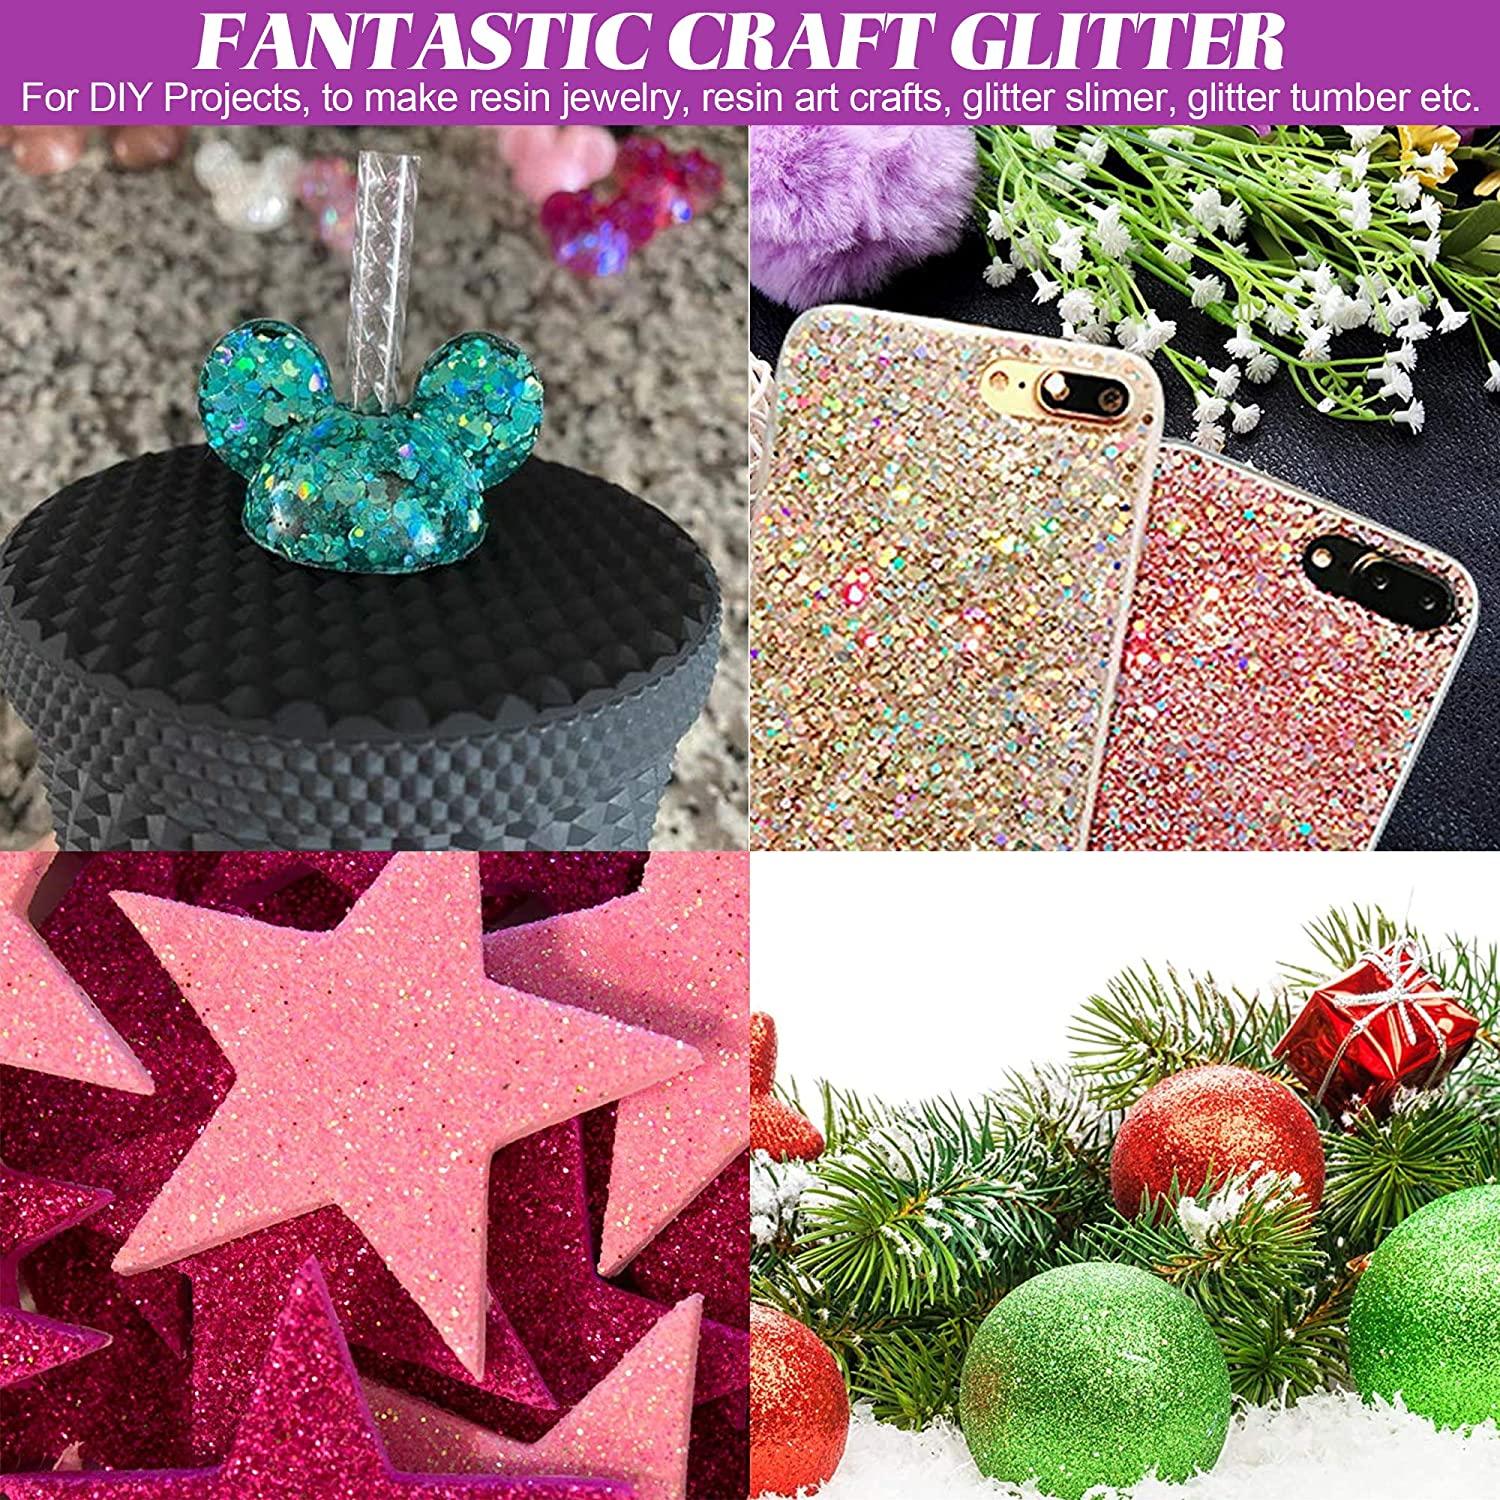 Craft and Party 1 Pound Bottled Craft Glitter for Craft and Decoration (Red)